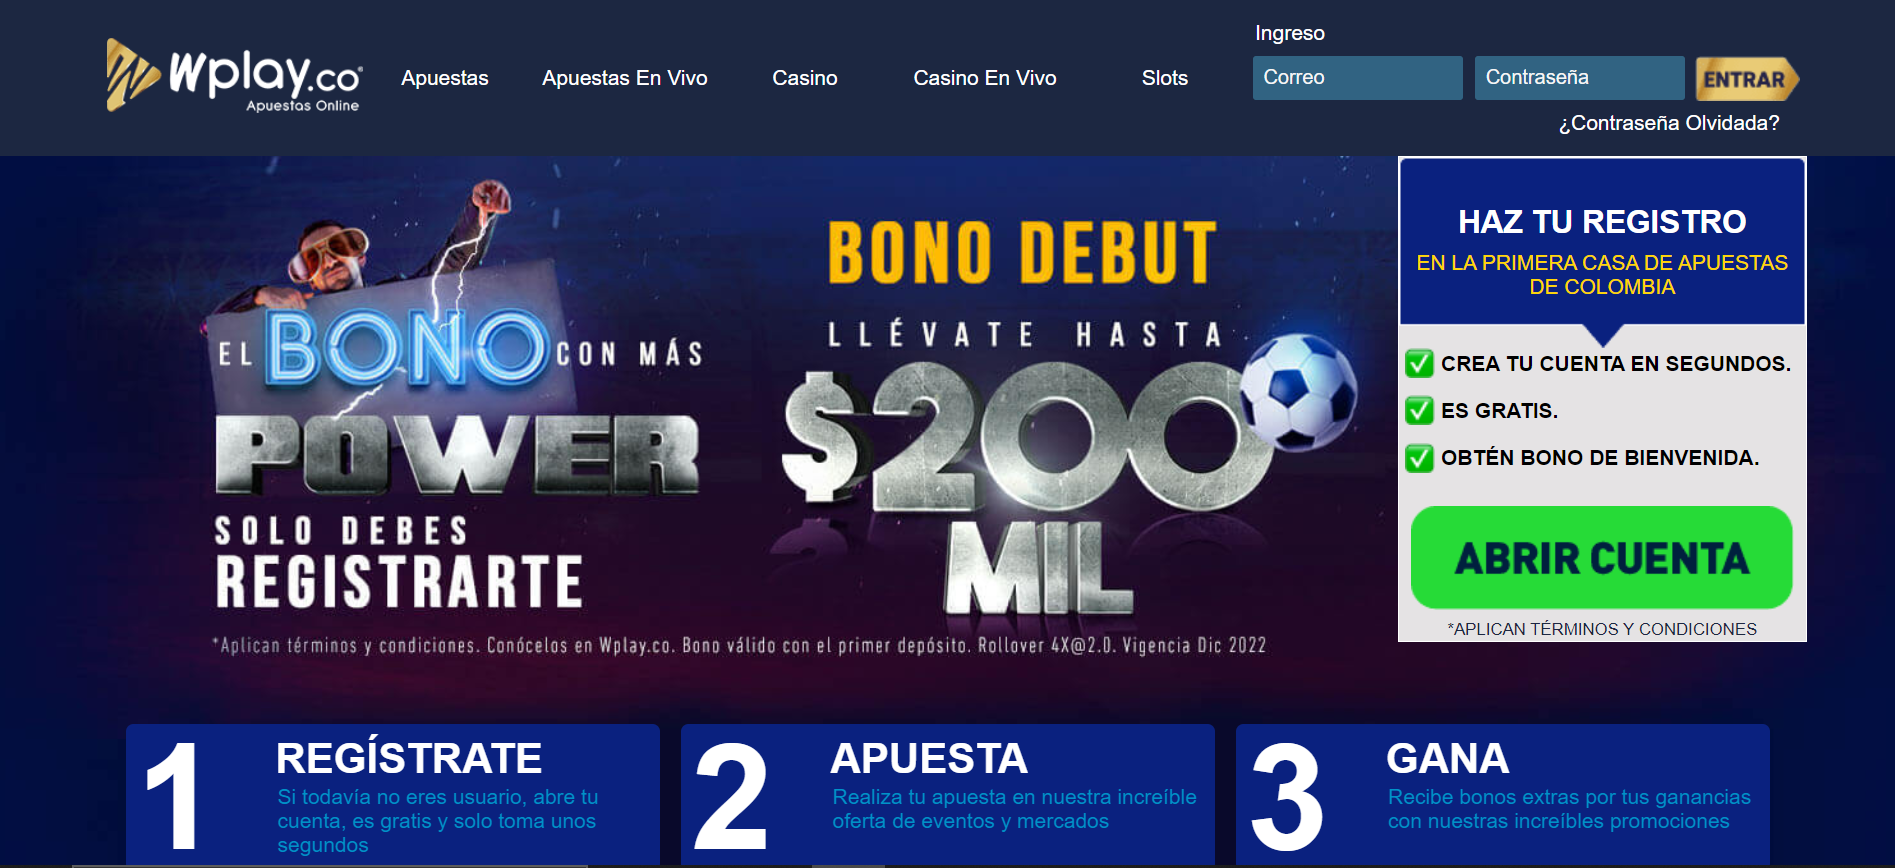 Wplay homepage offering players to use the services offered for online sports betting.